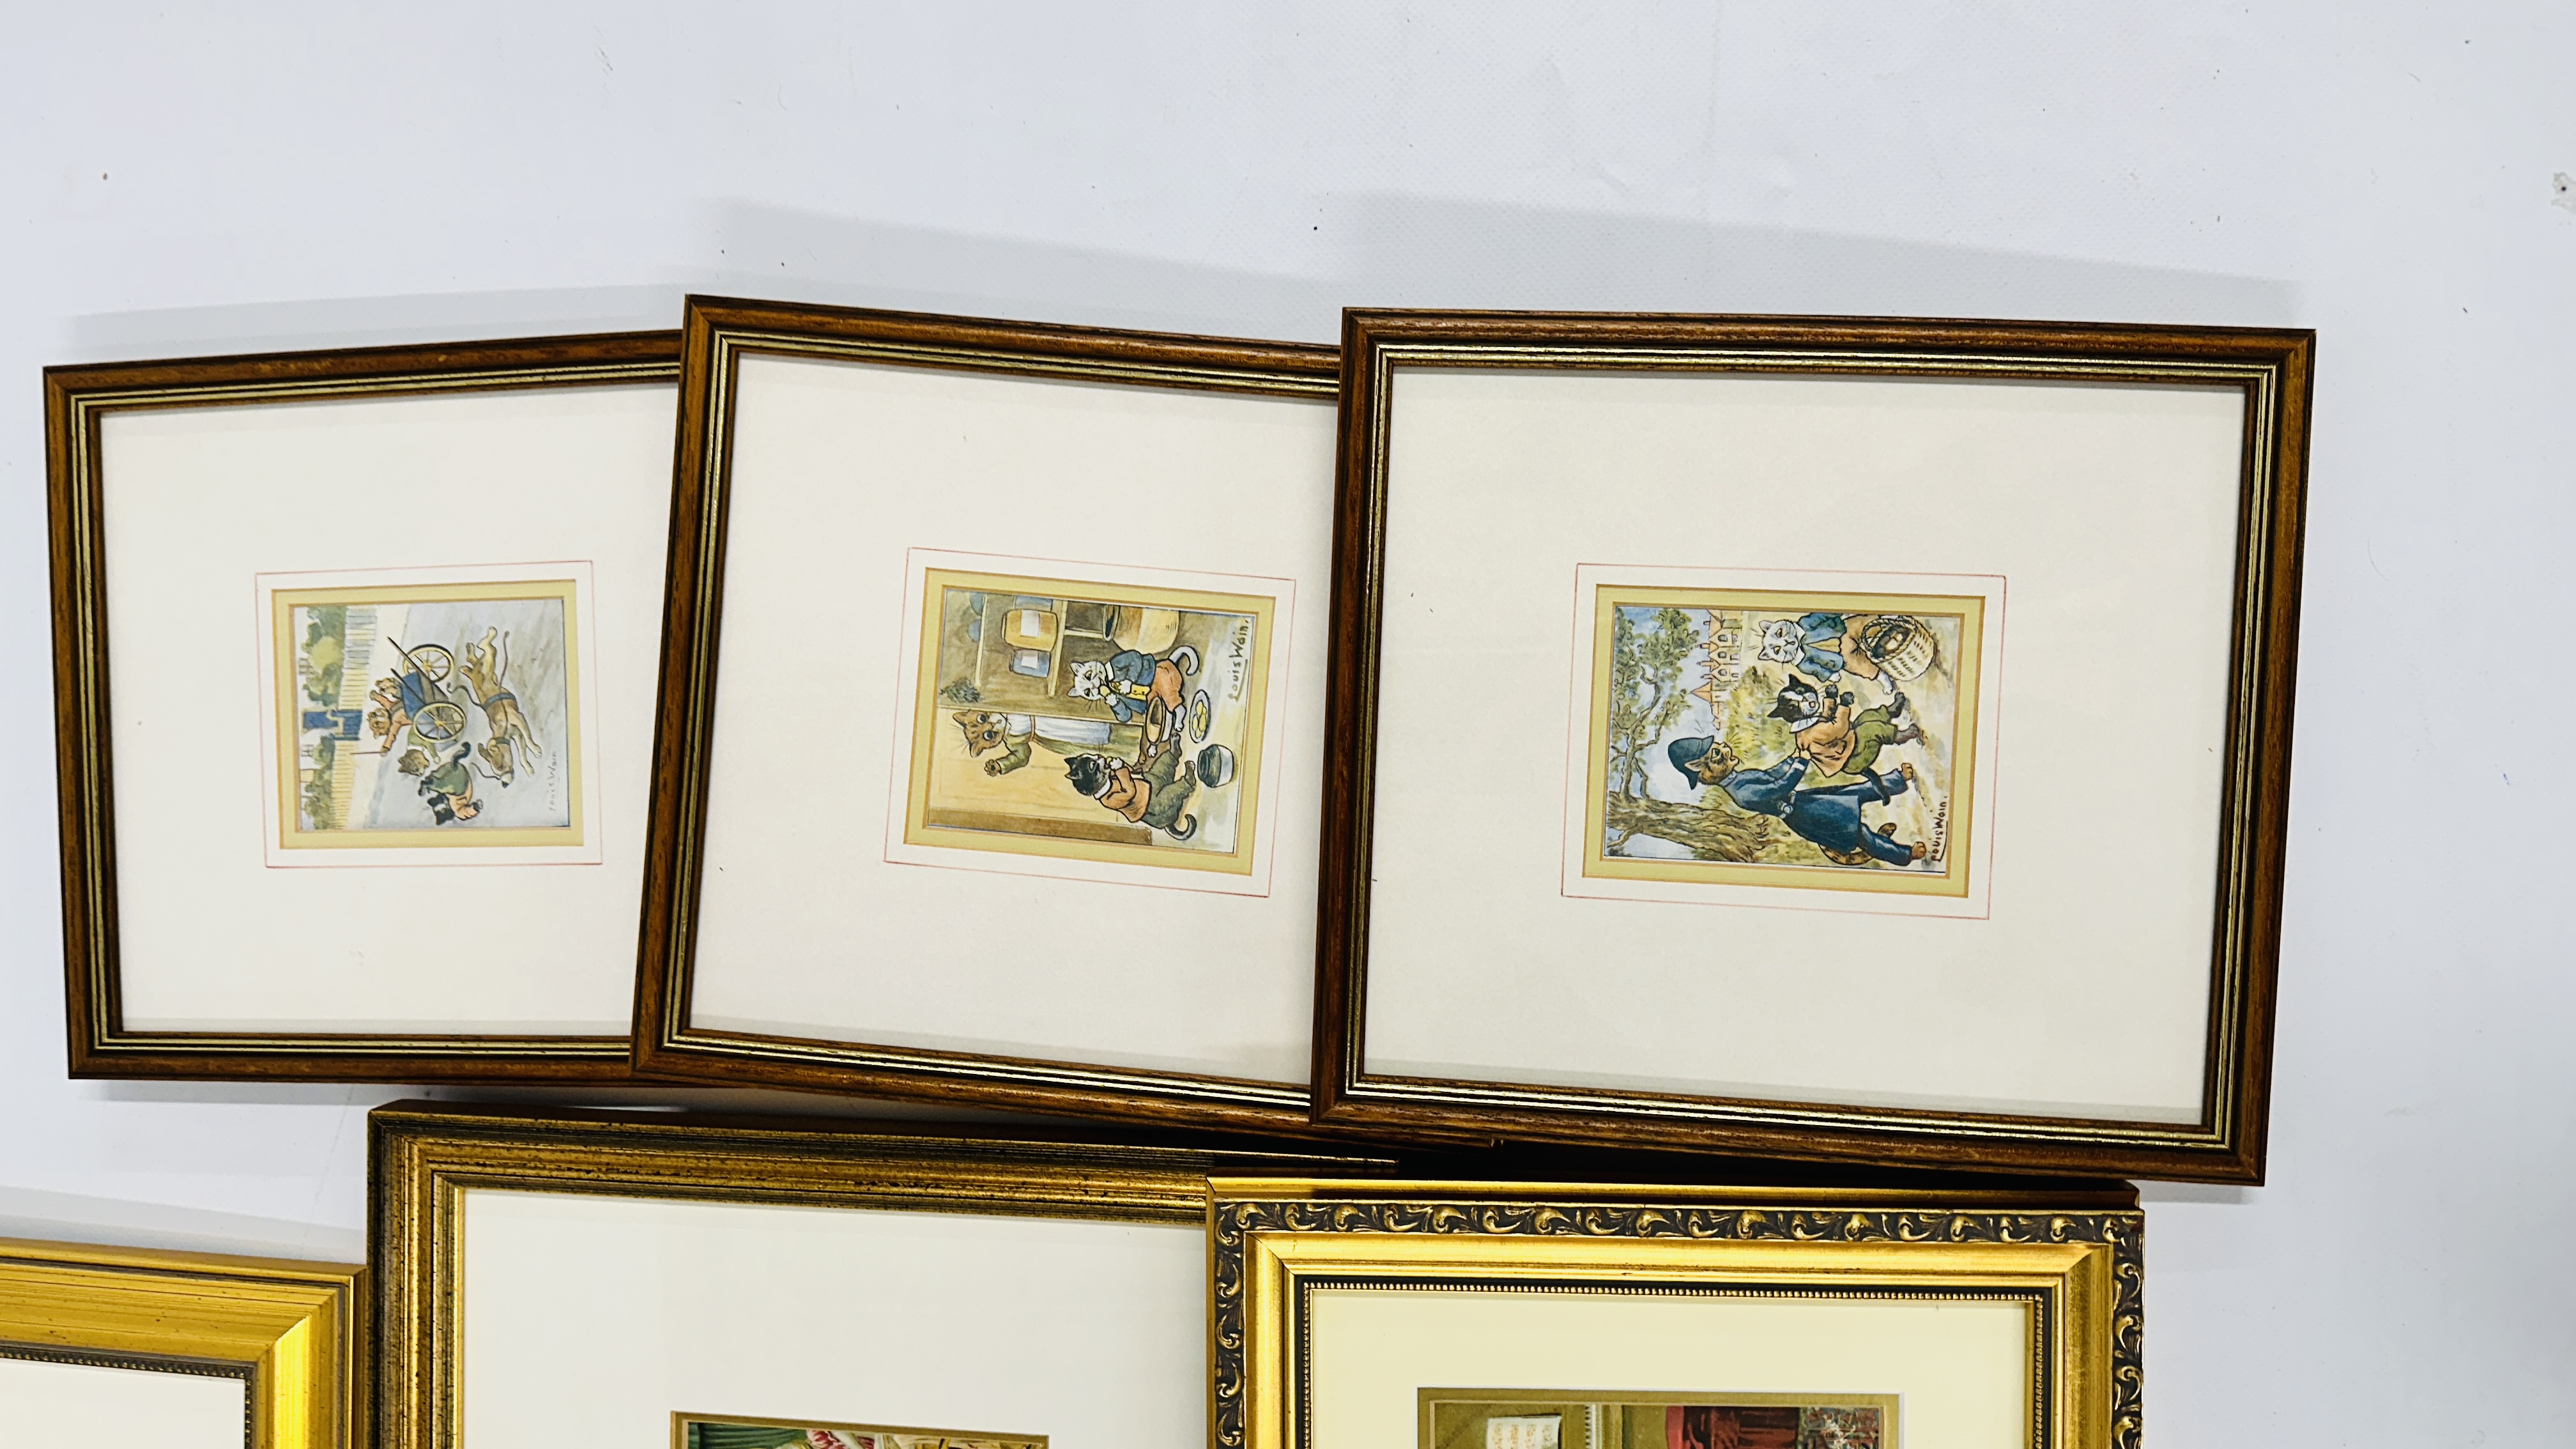 A GROUP OF 9 FRAMED CAT PRINTS TO INCLUDE 6 REPRODUCTION LOUIS WAIN EXAMPLES ETC. - Image 2 of 6